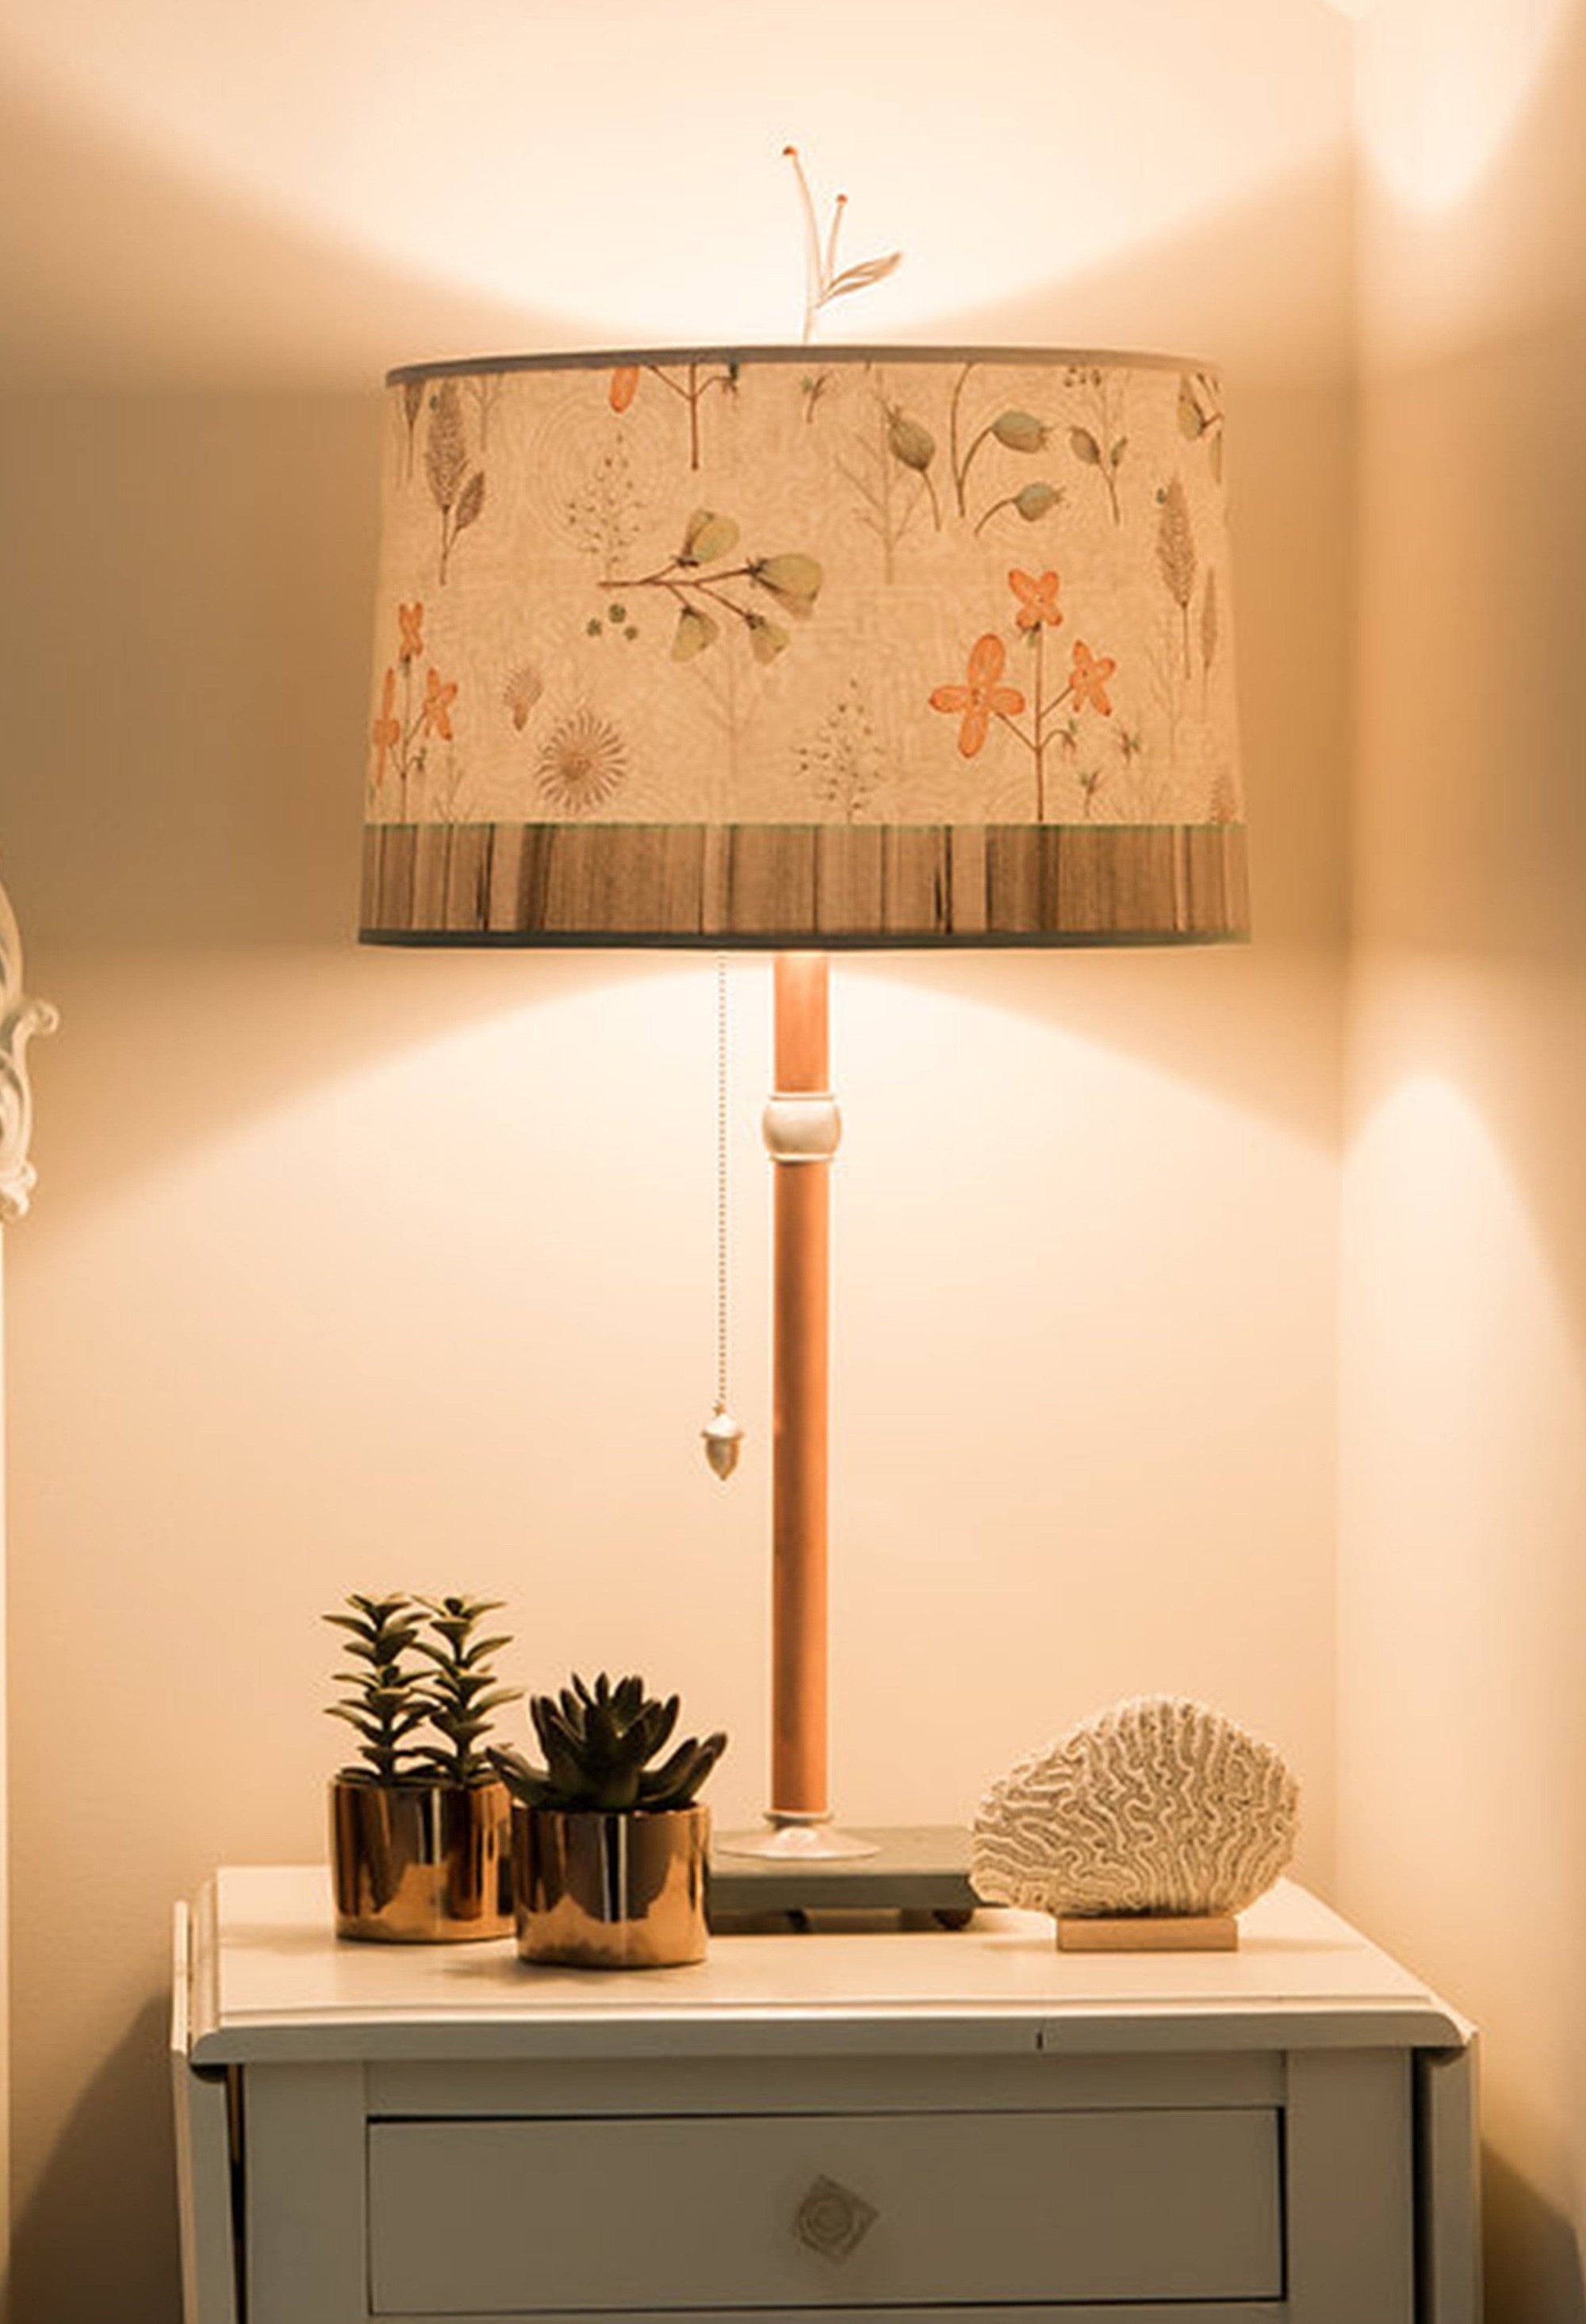 Copper Table Lamp with Large Drum Shade in Flora and Maze